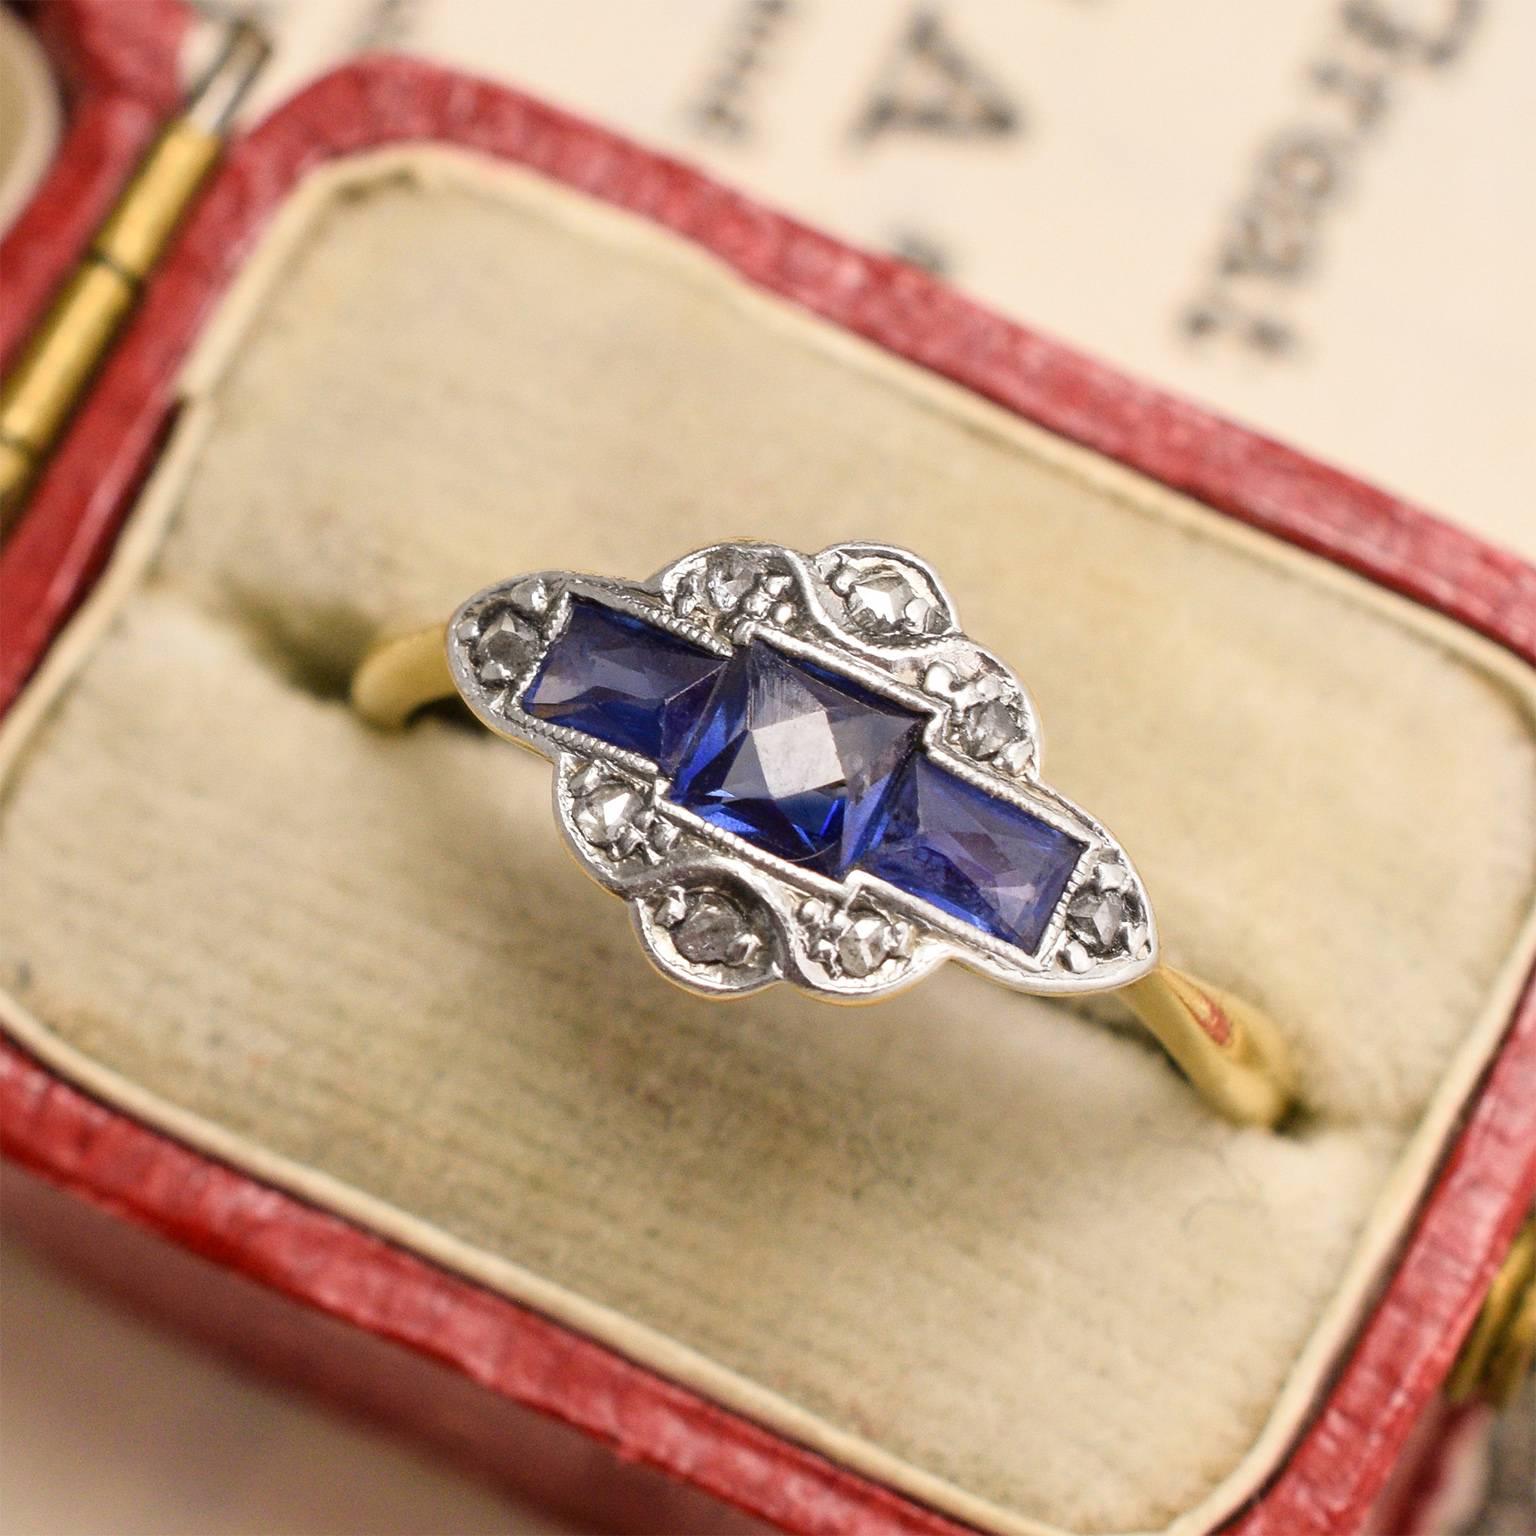 Women's Art Deco Ring with French Cut Sapphires and Rose Cut Diamonds